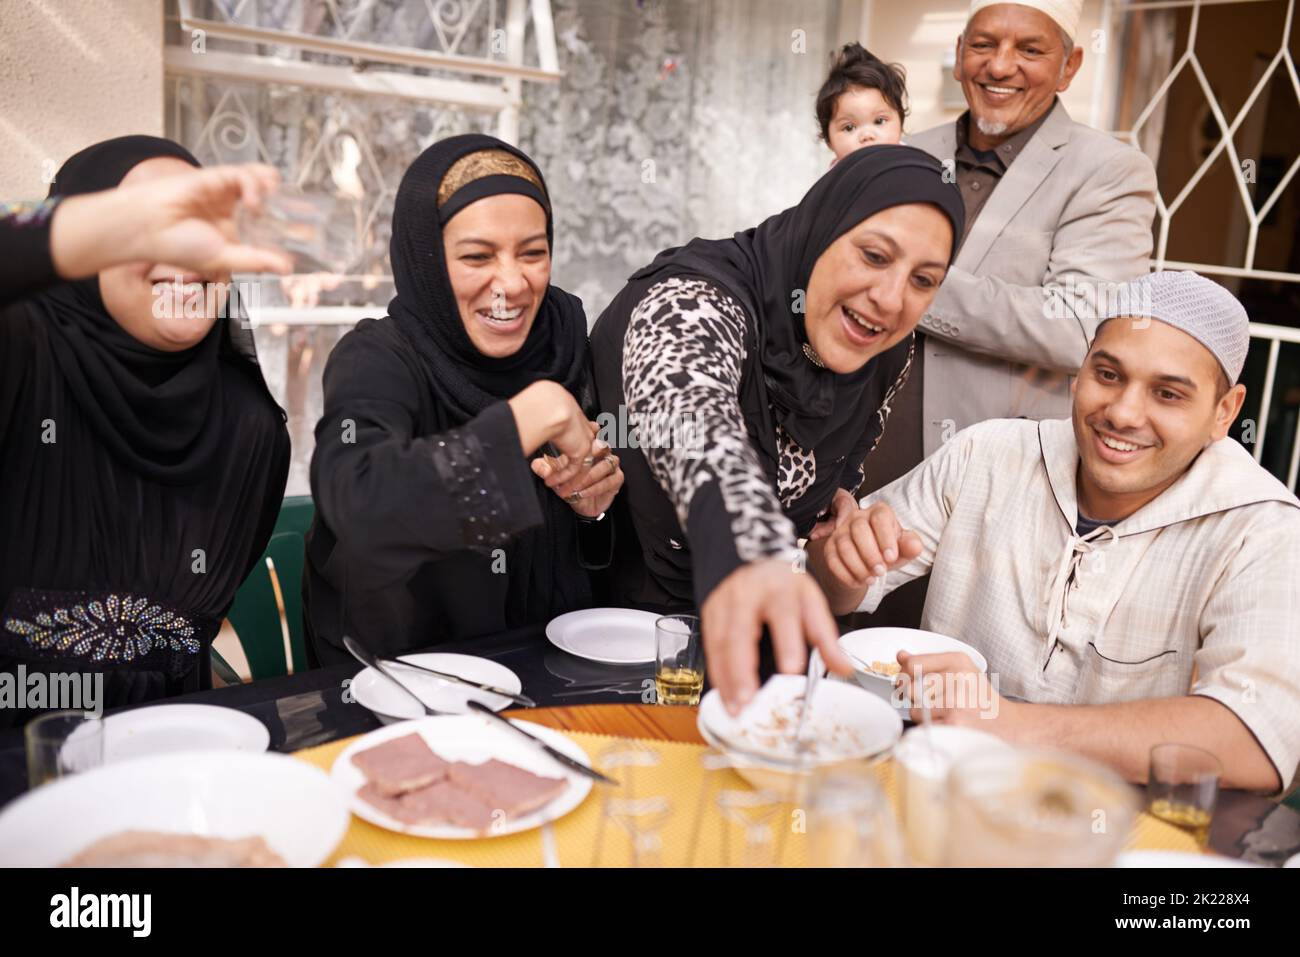 I made enough for everyone. a muslim family eating together. Stock Photo